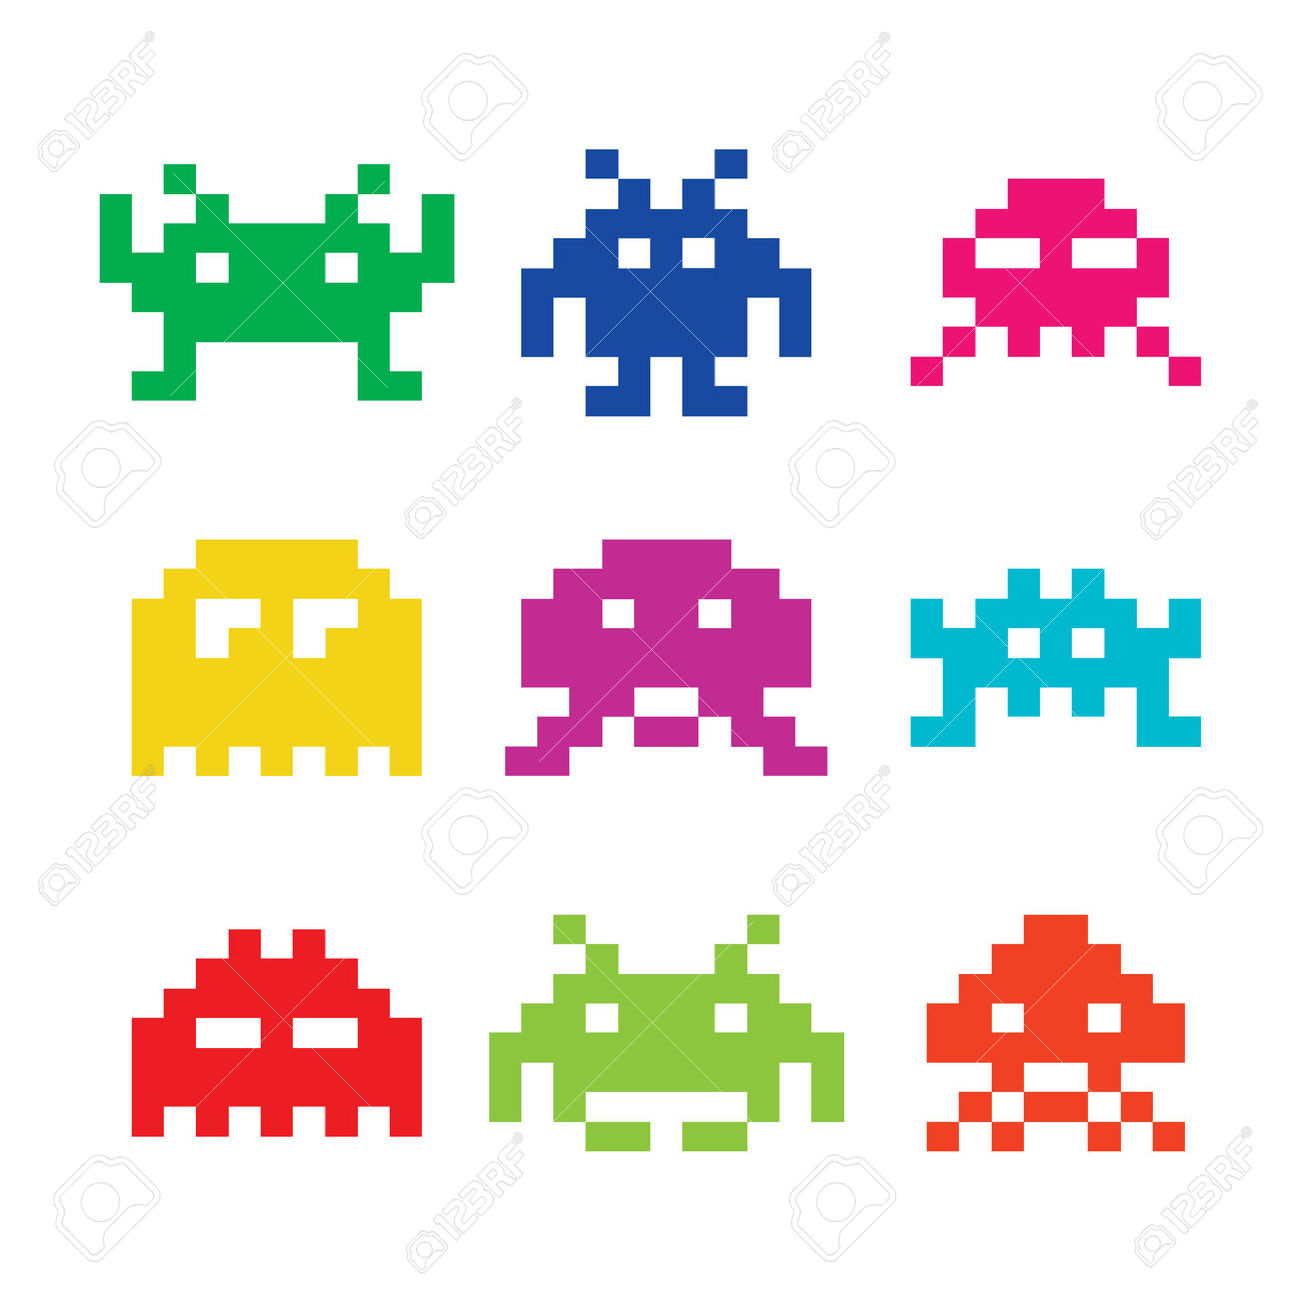 Invaders clipart - Clipground